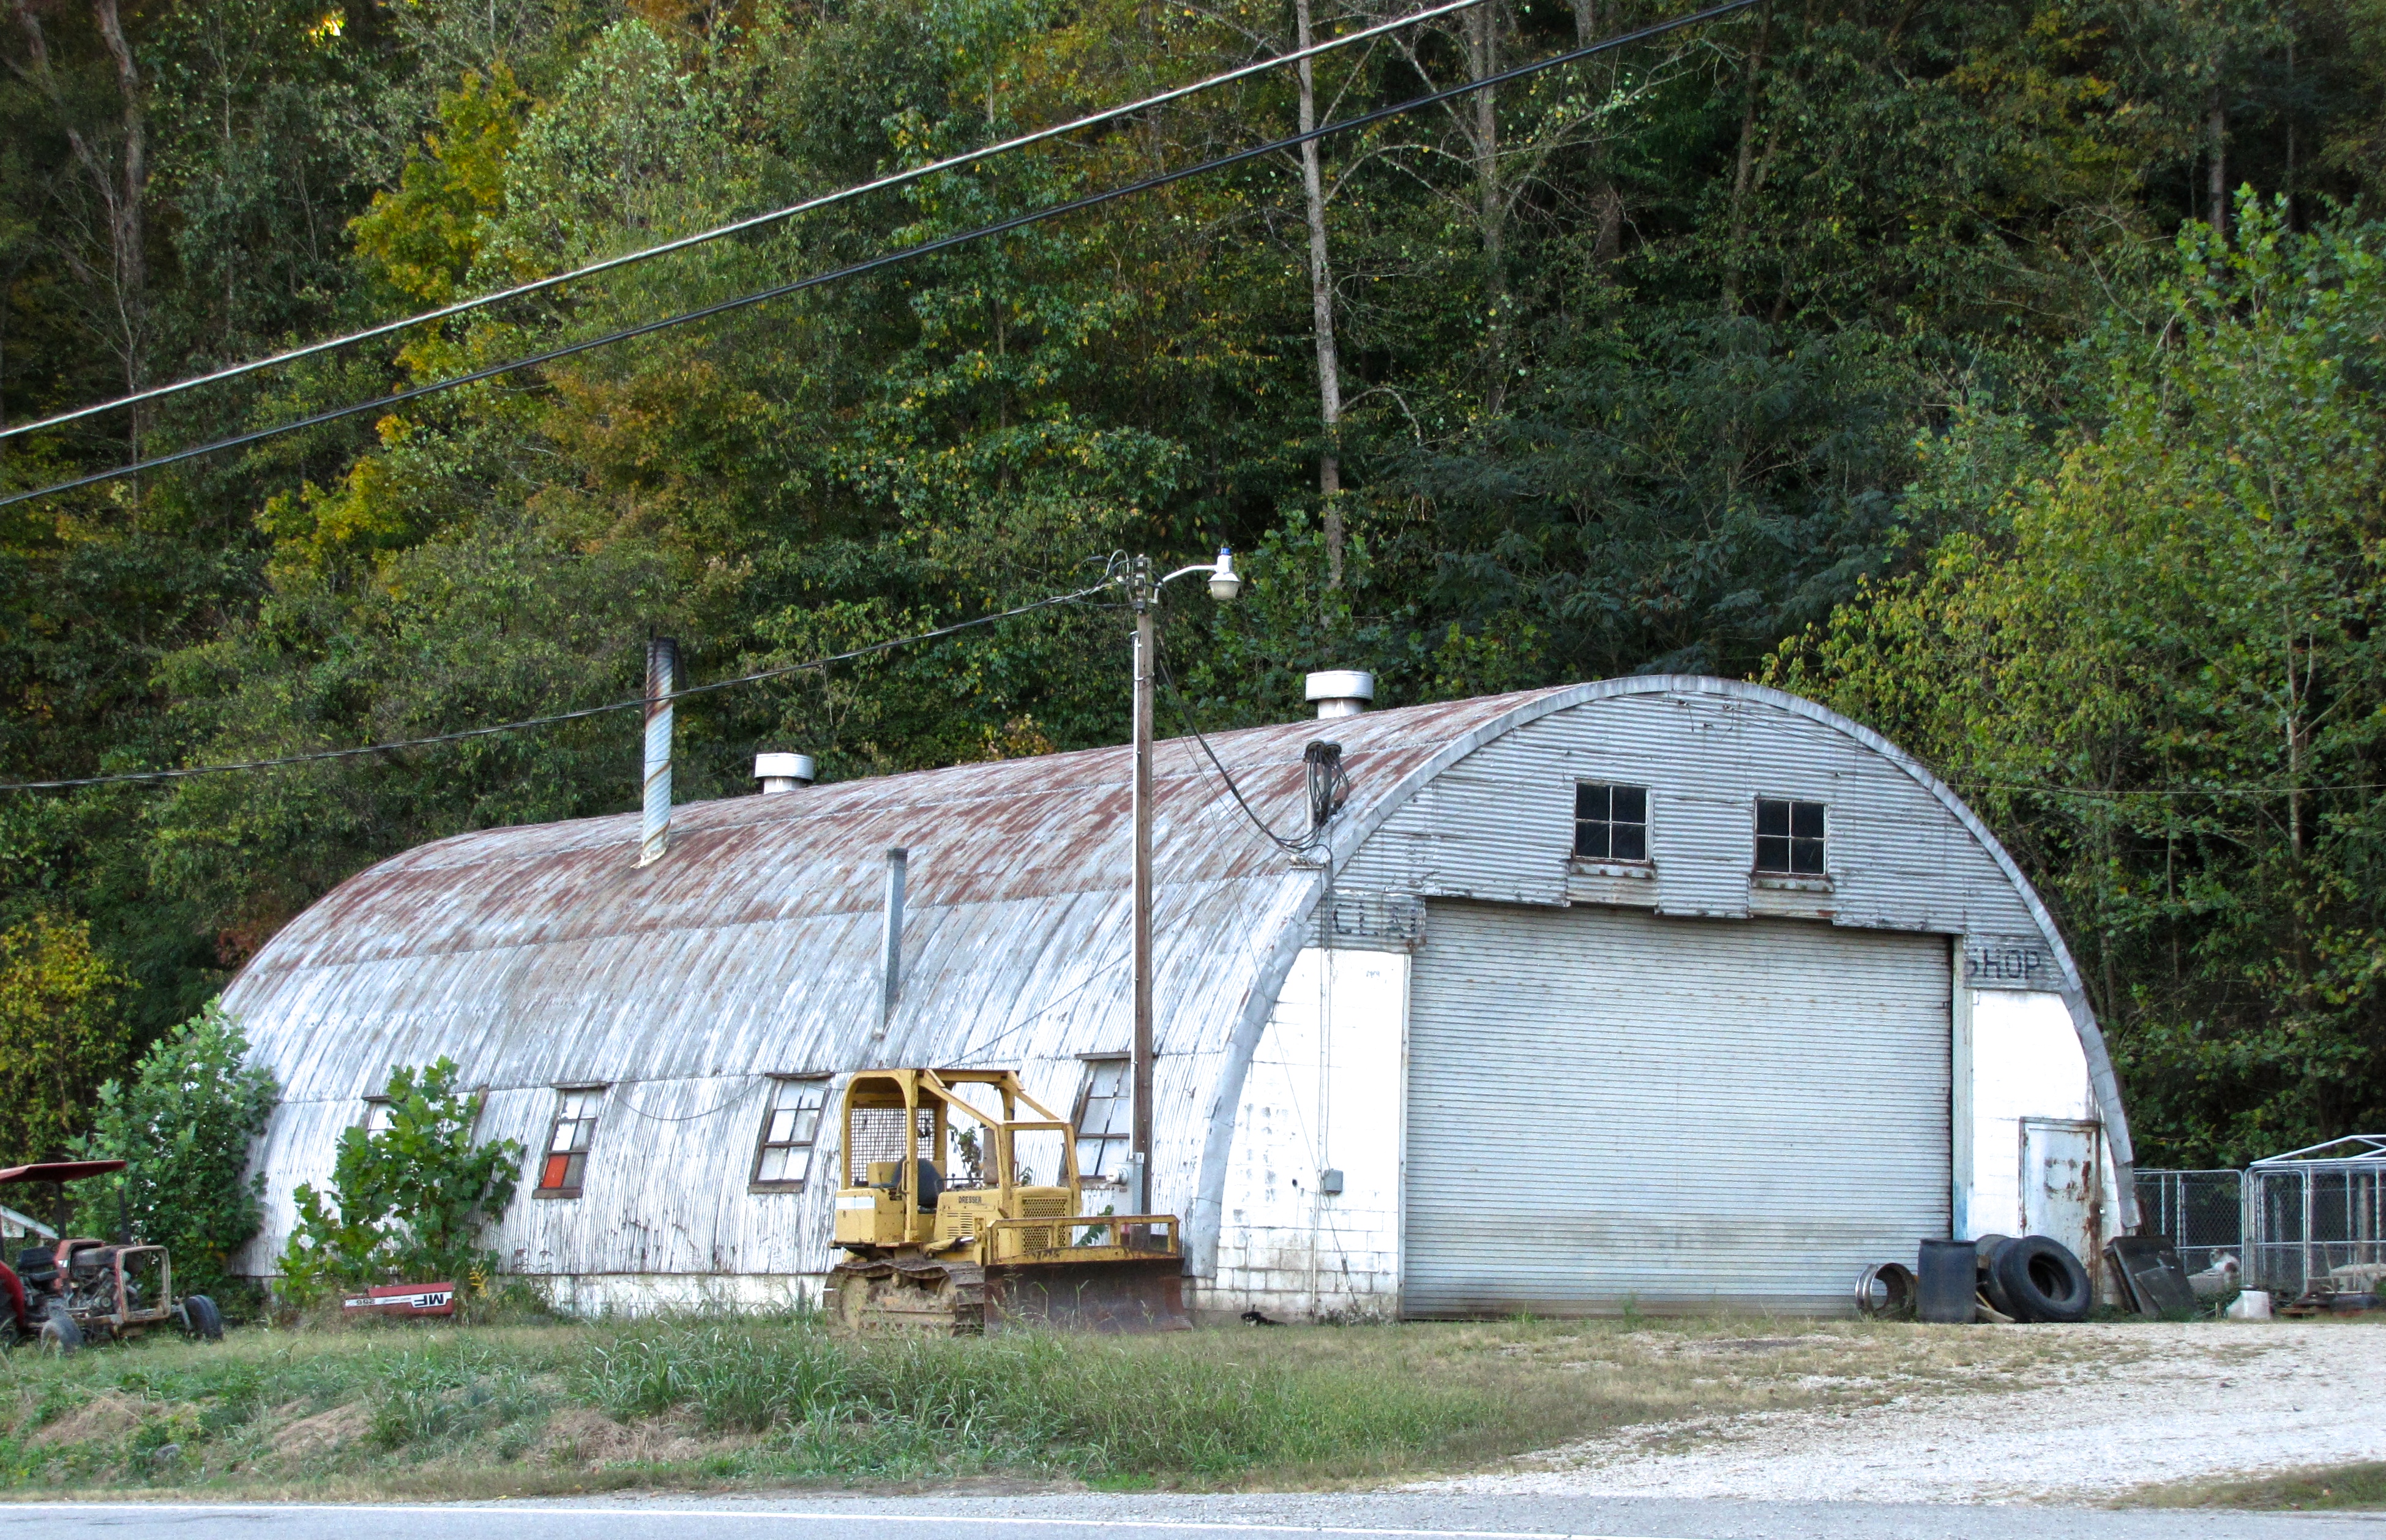 quonset hut in Millersville, MD